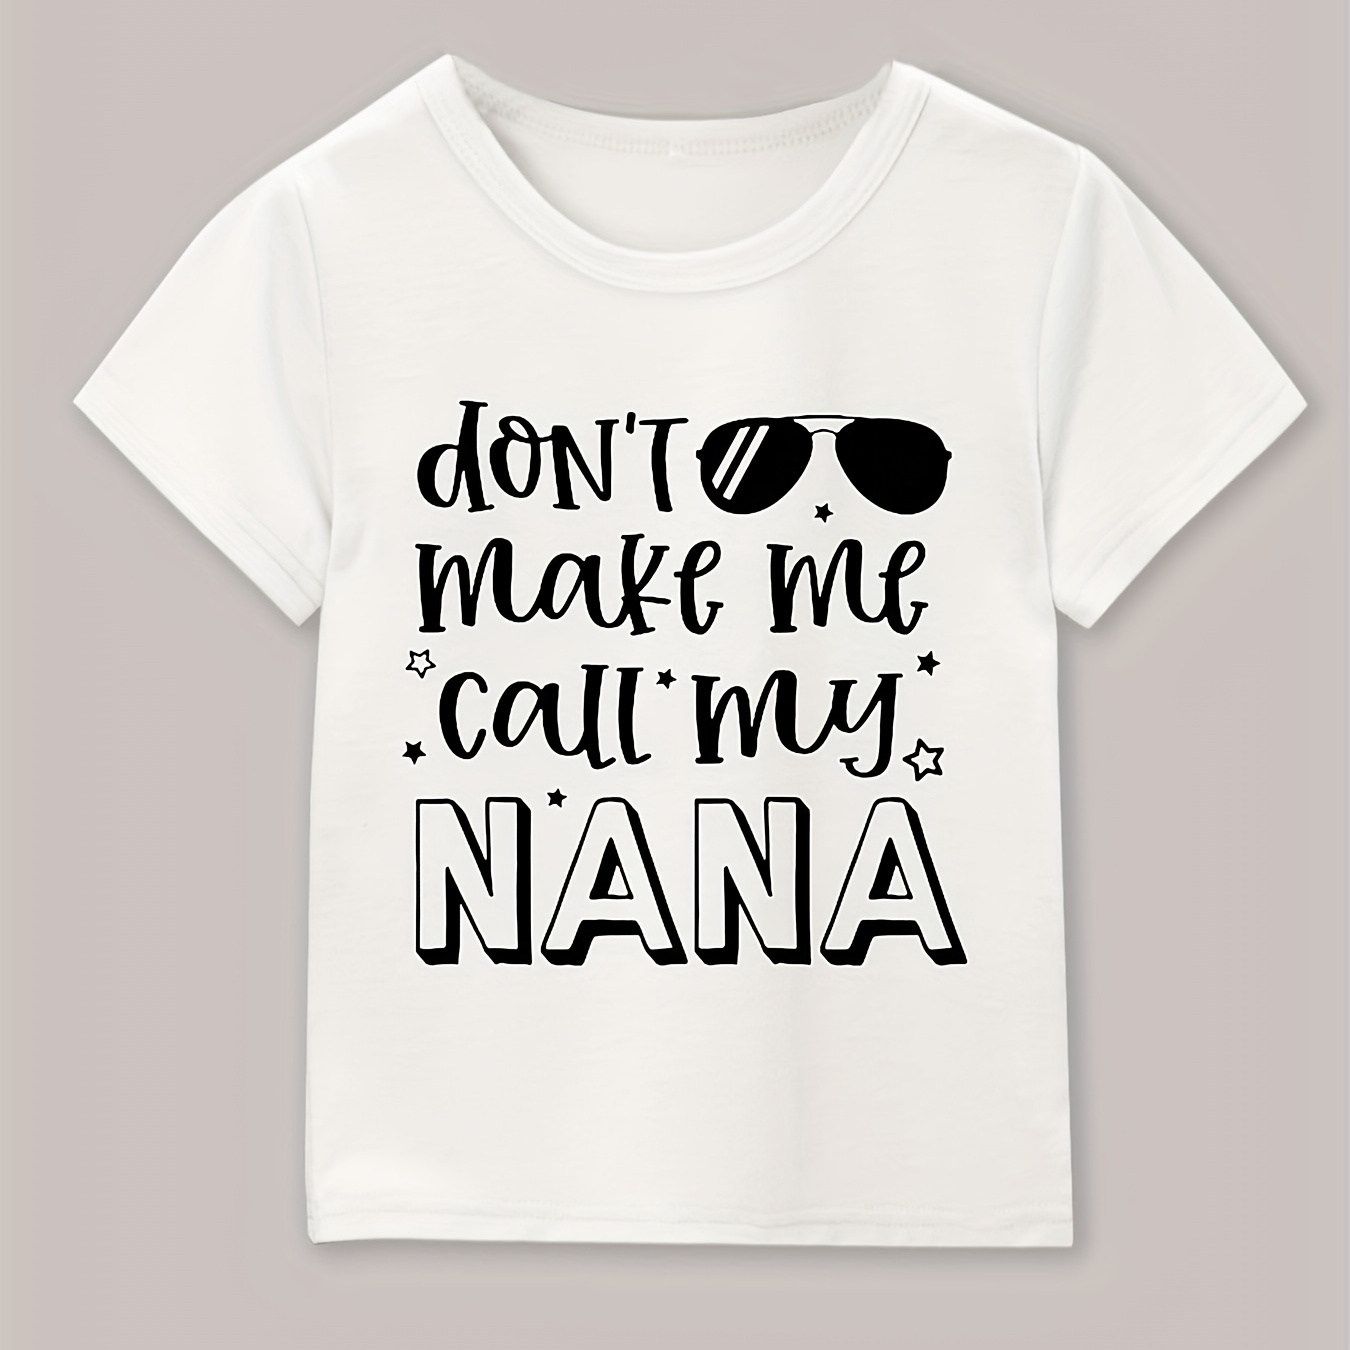 

Don't Make Me Call My Nana Letter Print Boys Creative T-shirt, Casual Lightweight Comfy Short Sleeve Tee Tops, Kids Clothes For Summer